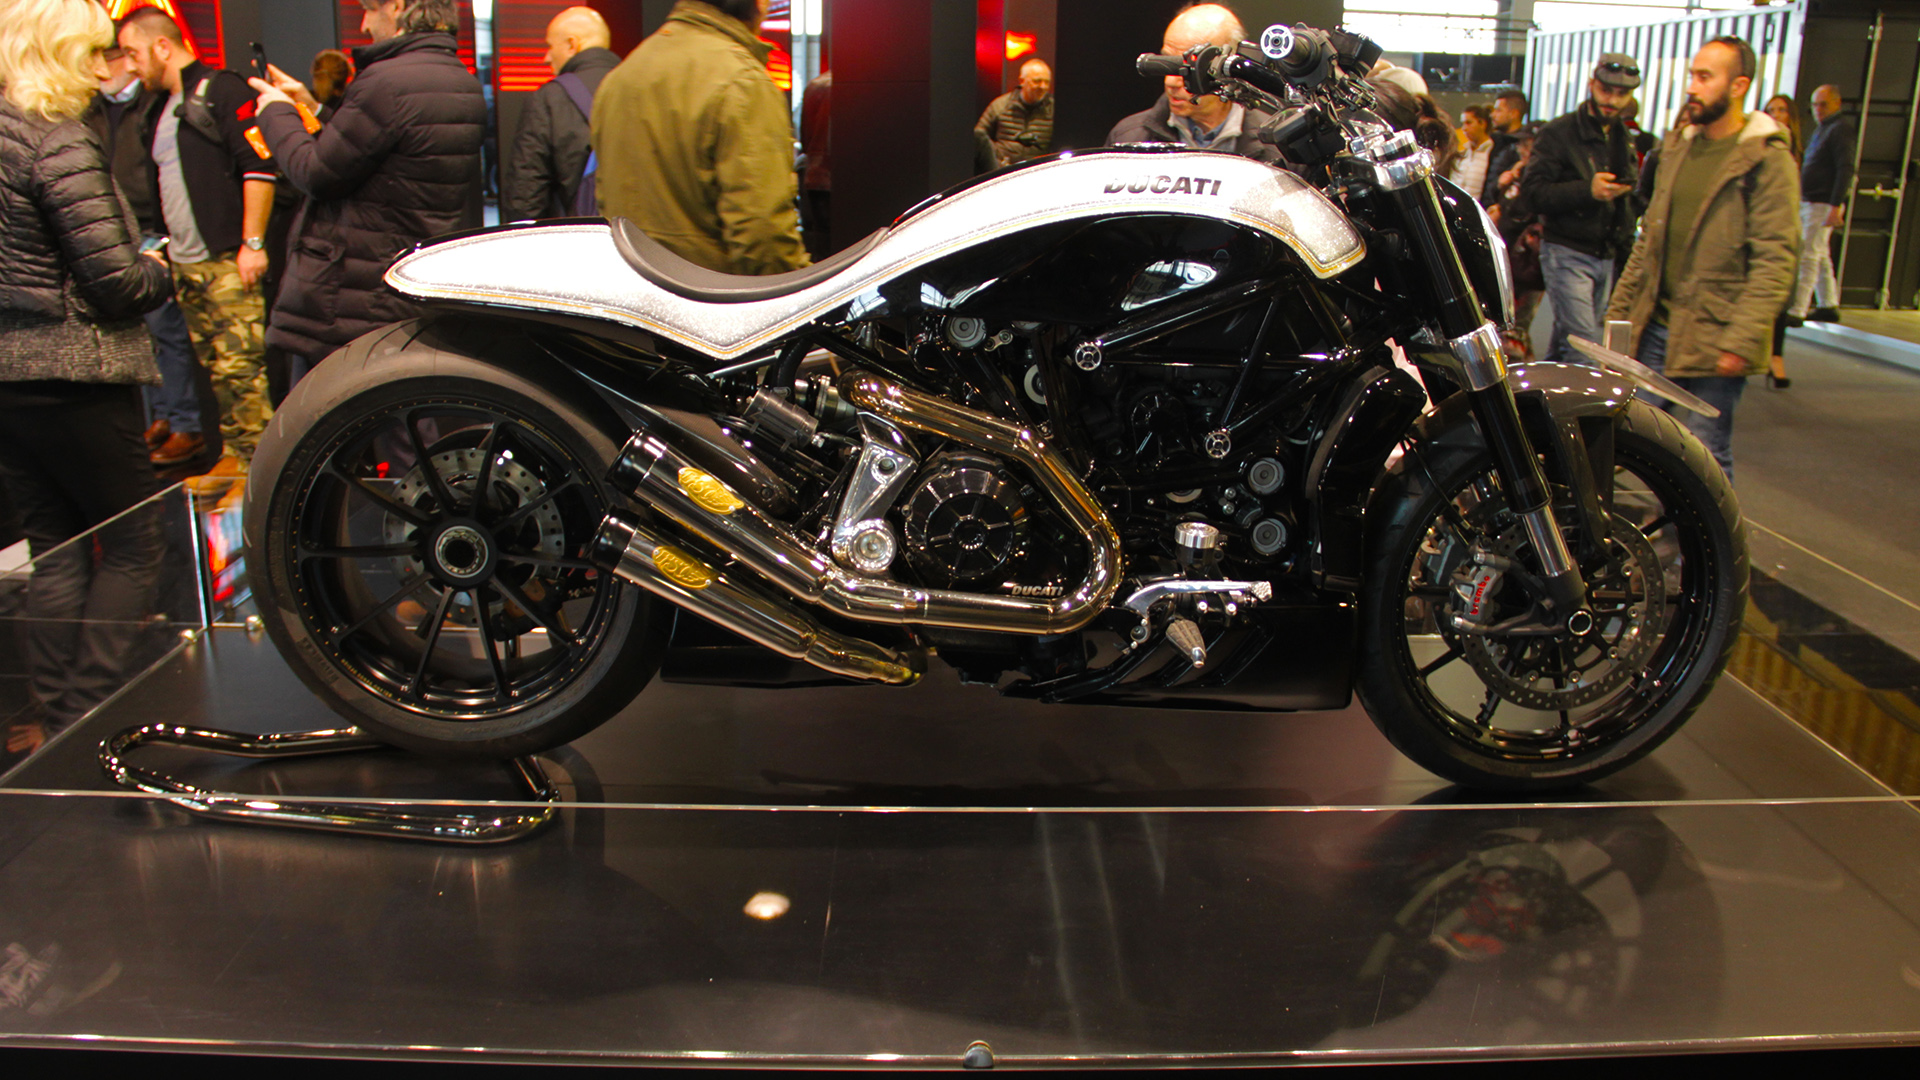 ducati-xdiavel-by-roland-sands